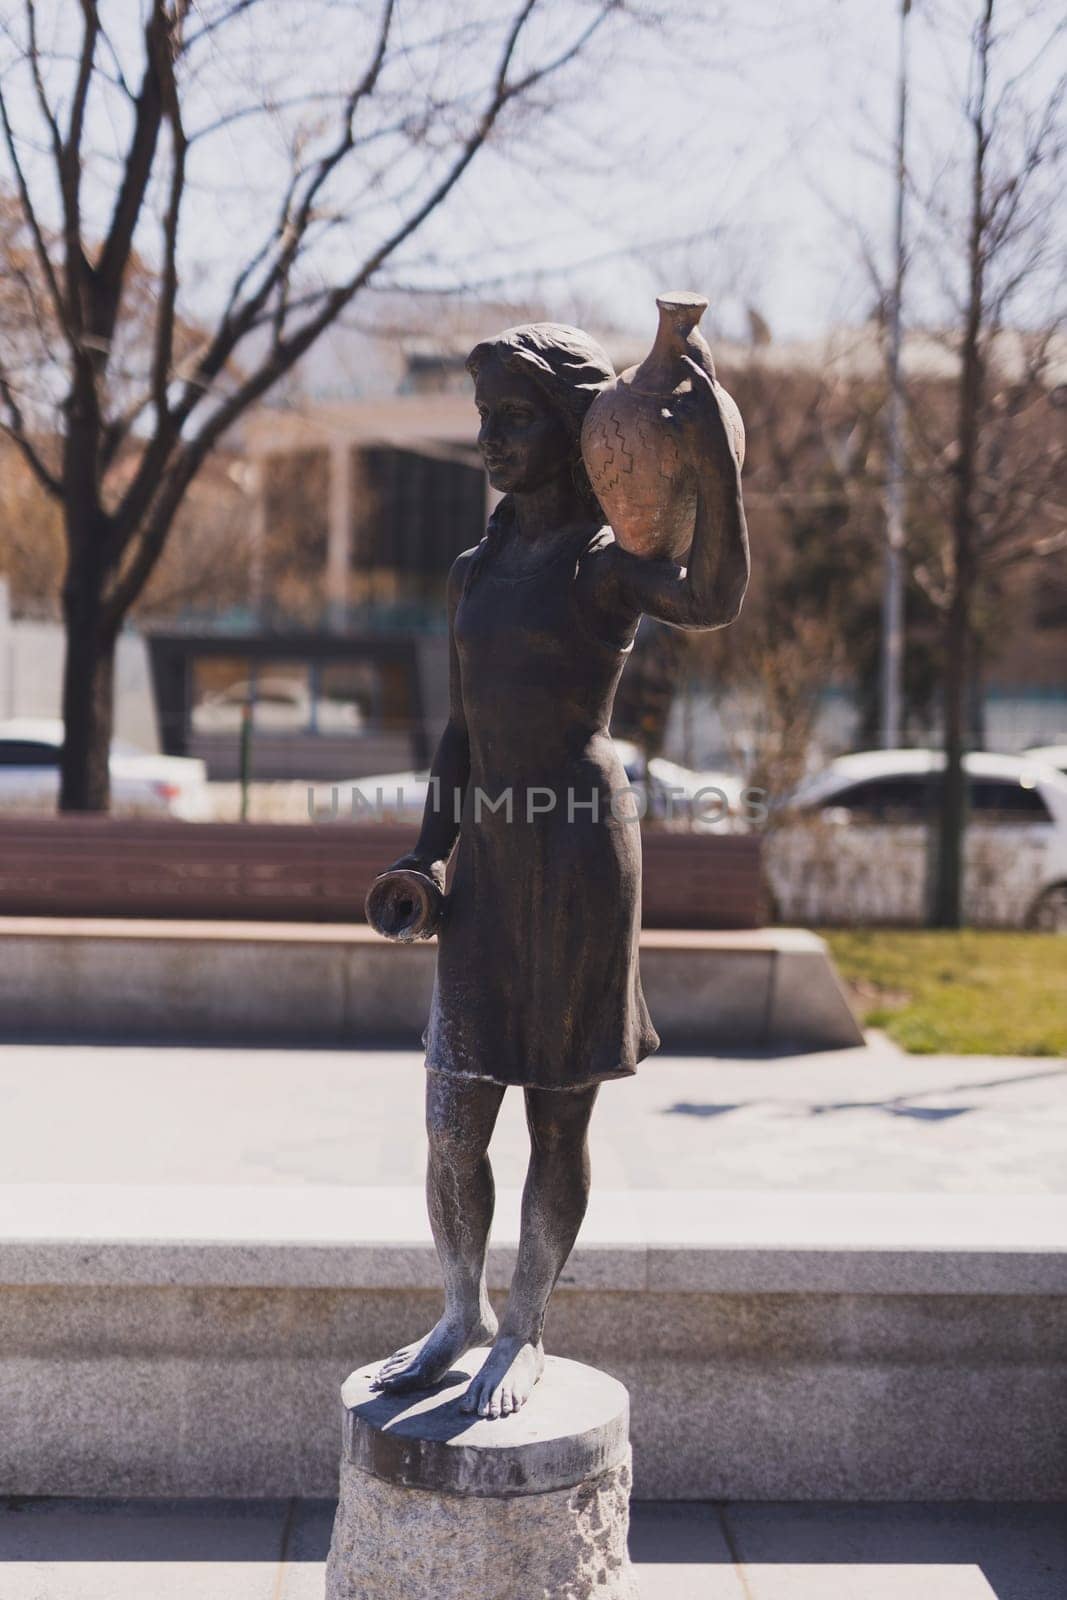 YEREVAN. ARMENIA. 29 MARCH 2022 : A sculpture of a girl with a jug in the park dedicated to the 2800th anniversary of Yerevan. by Satura86